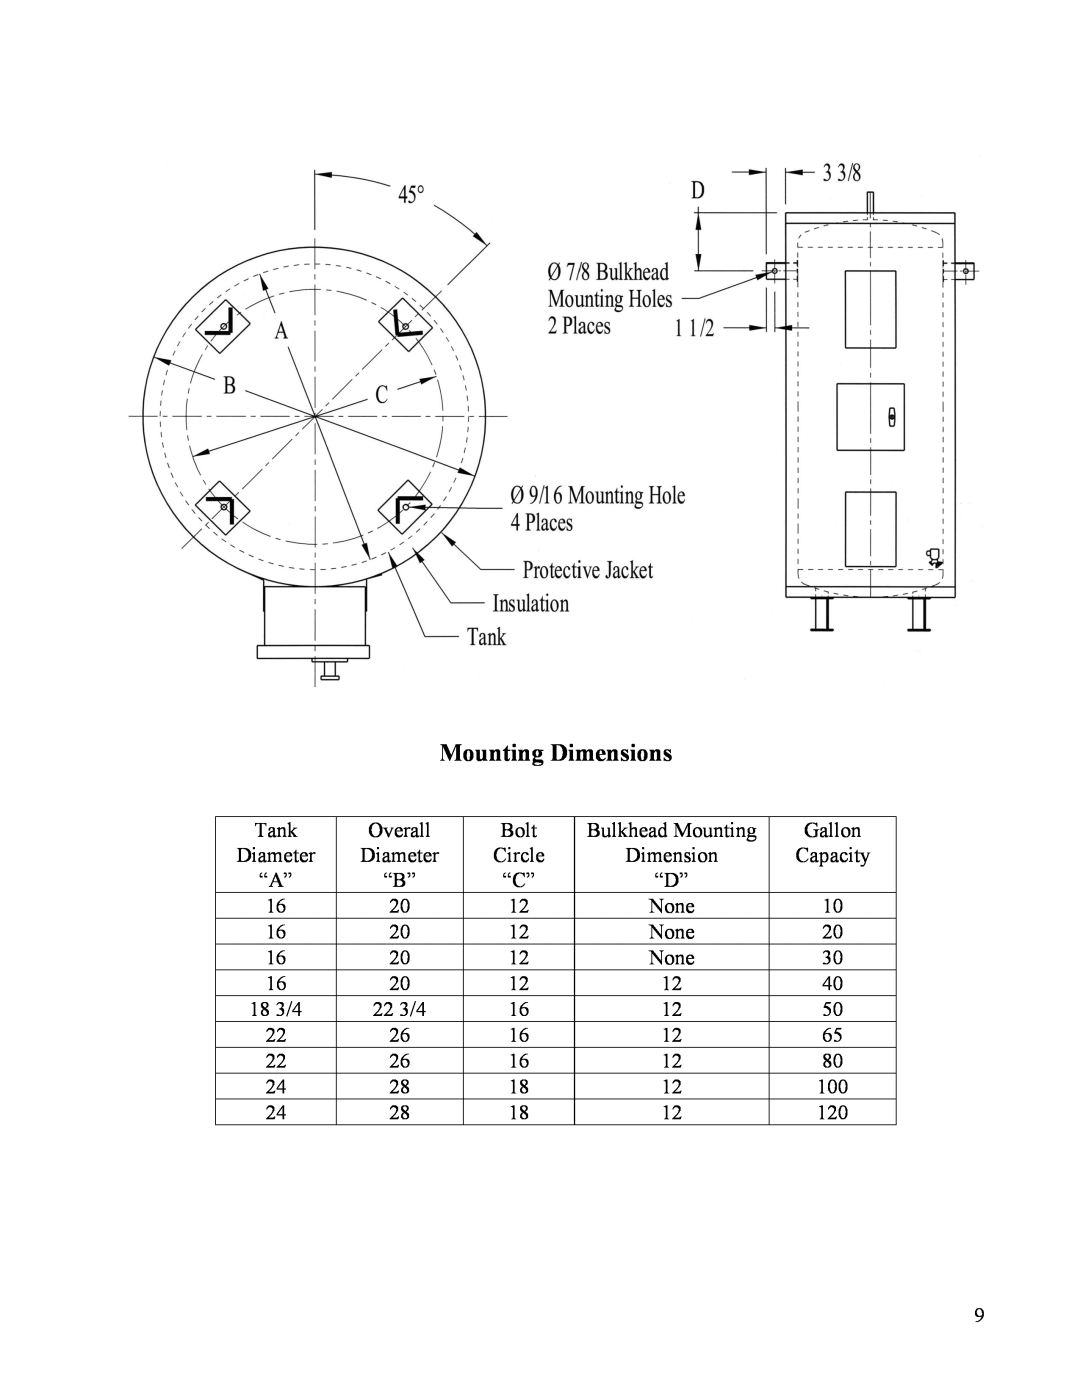 Hubbell Electric Heater Company ME manual Mounting Dimensions 